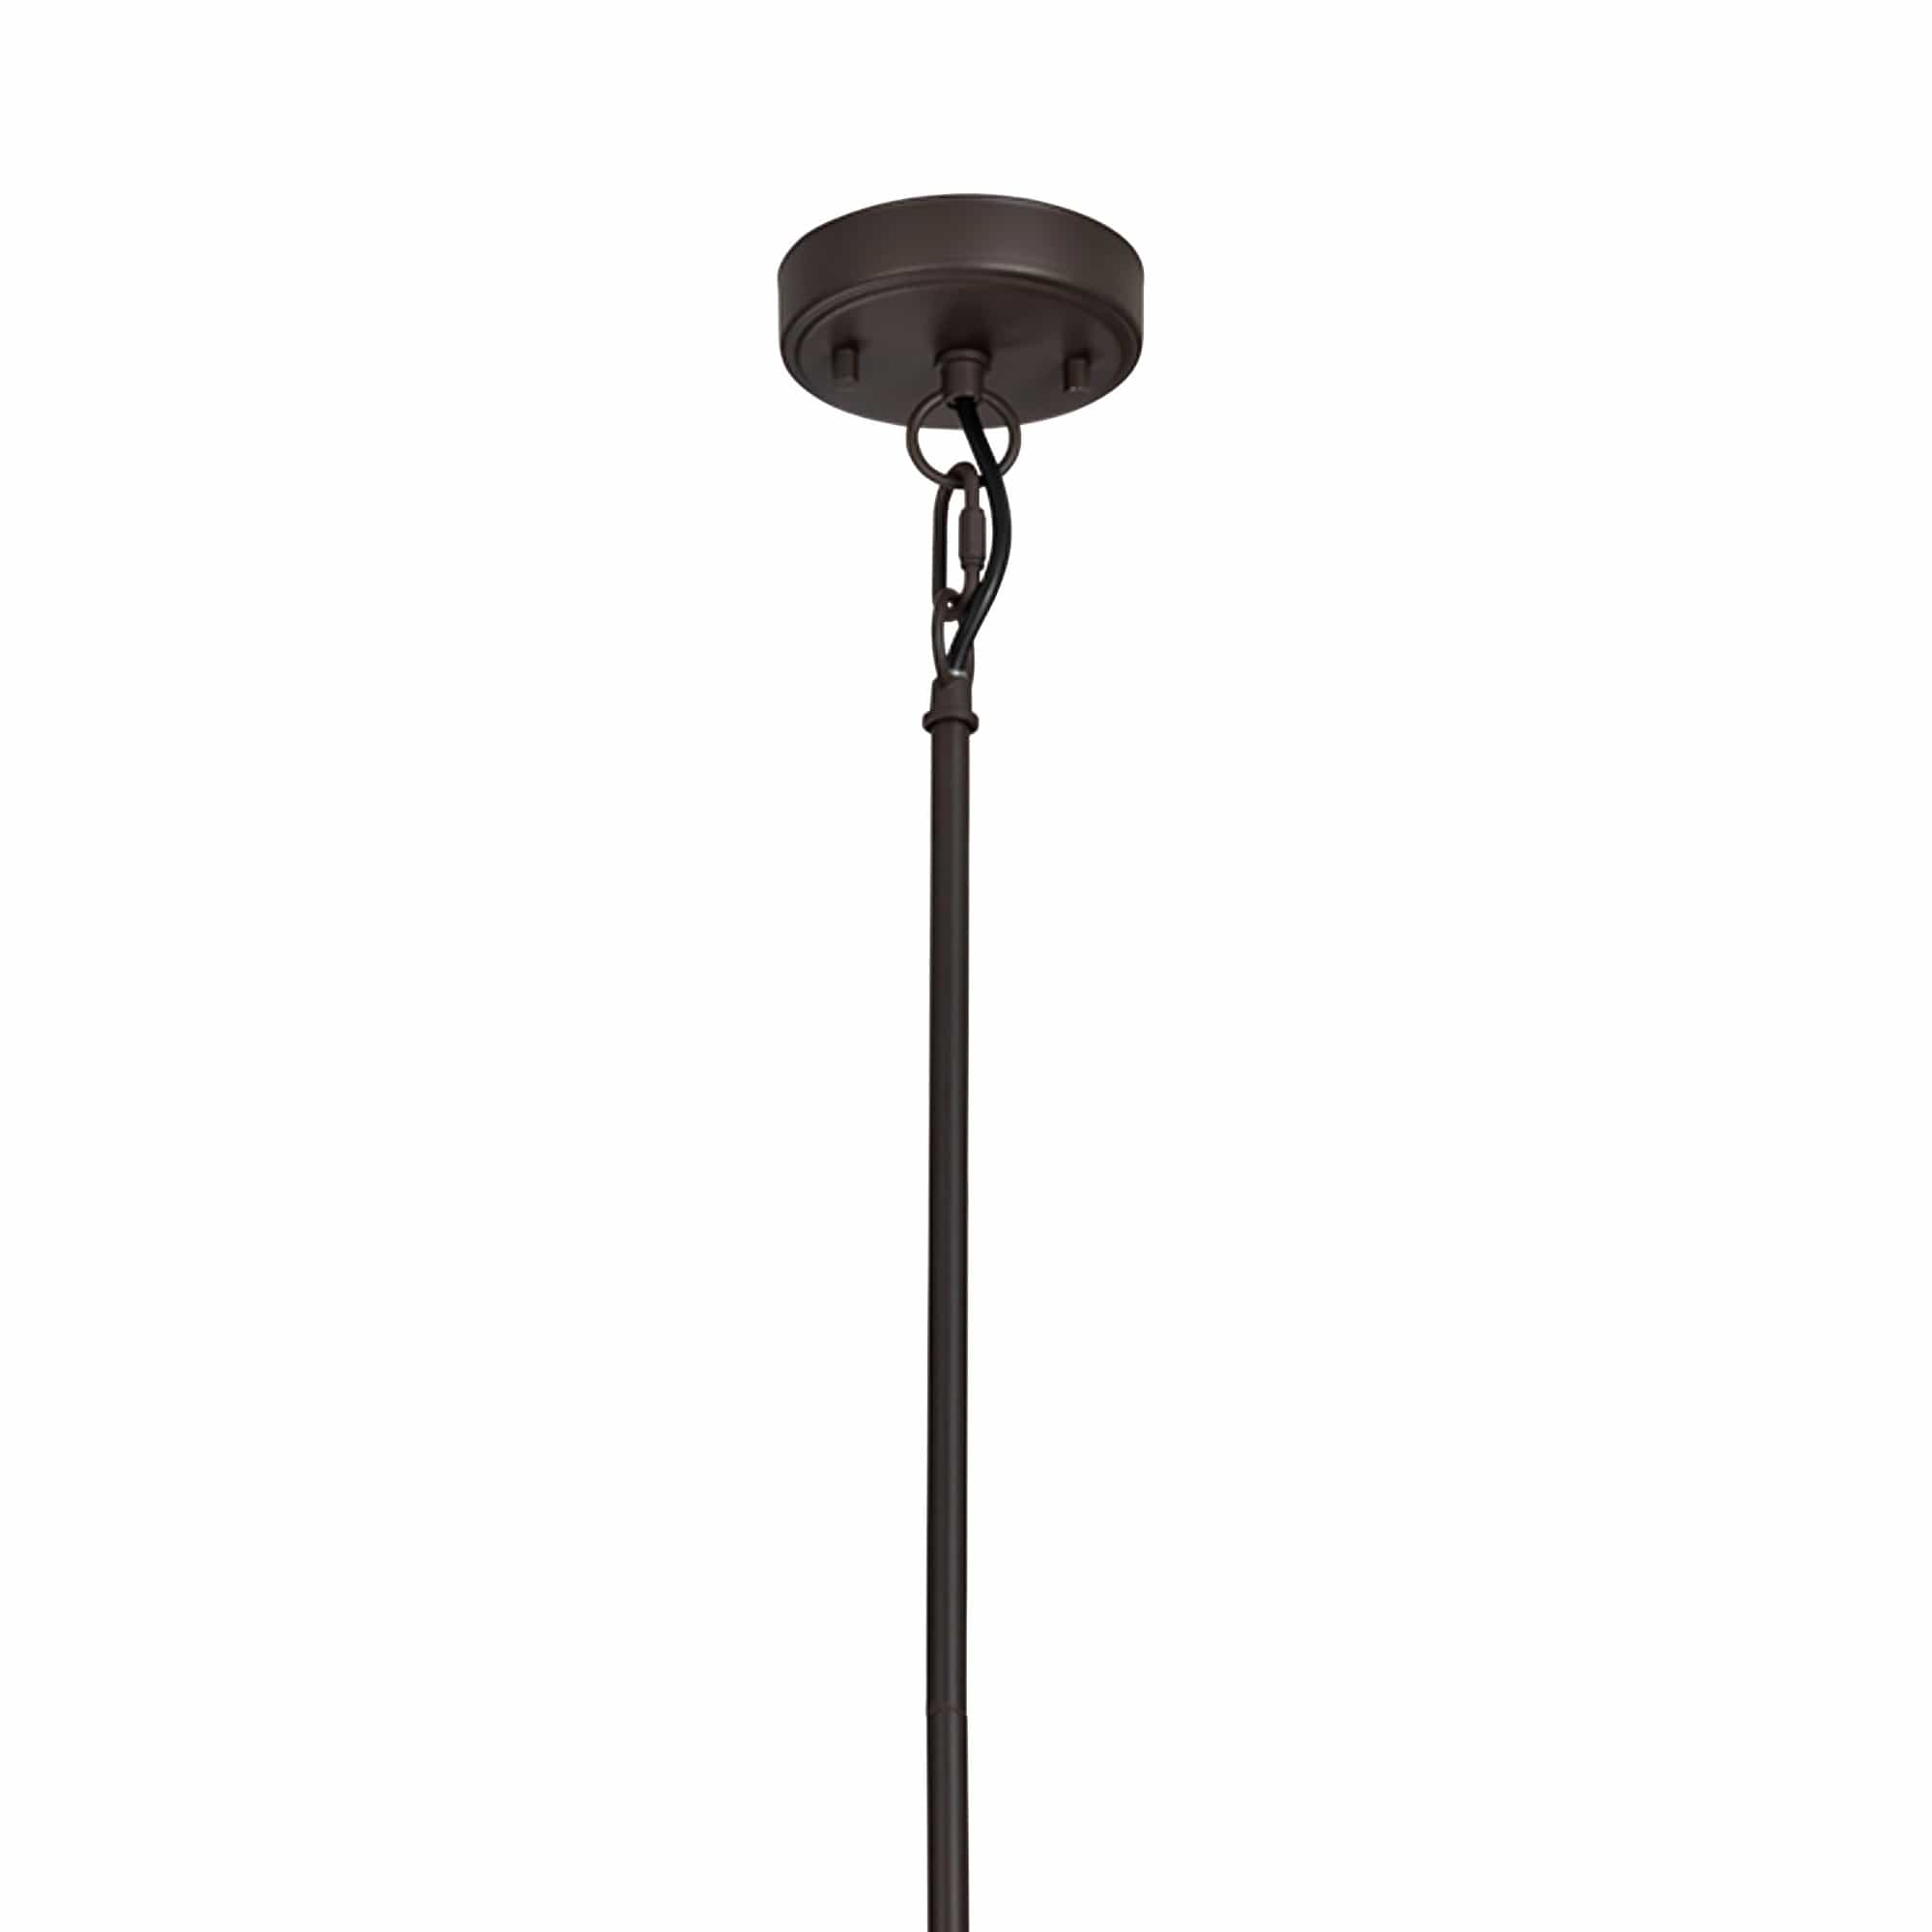 Anoro Ribbed Glass Ceiling Pendant Light - escapologyhome.co.uk